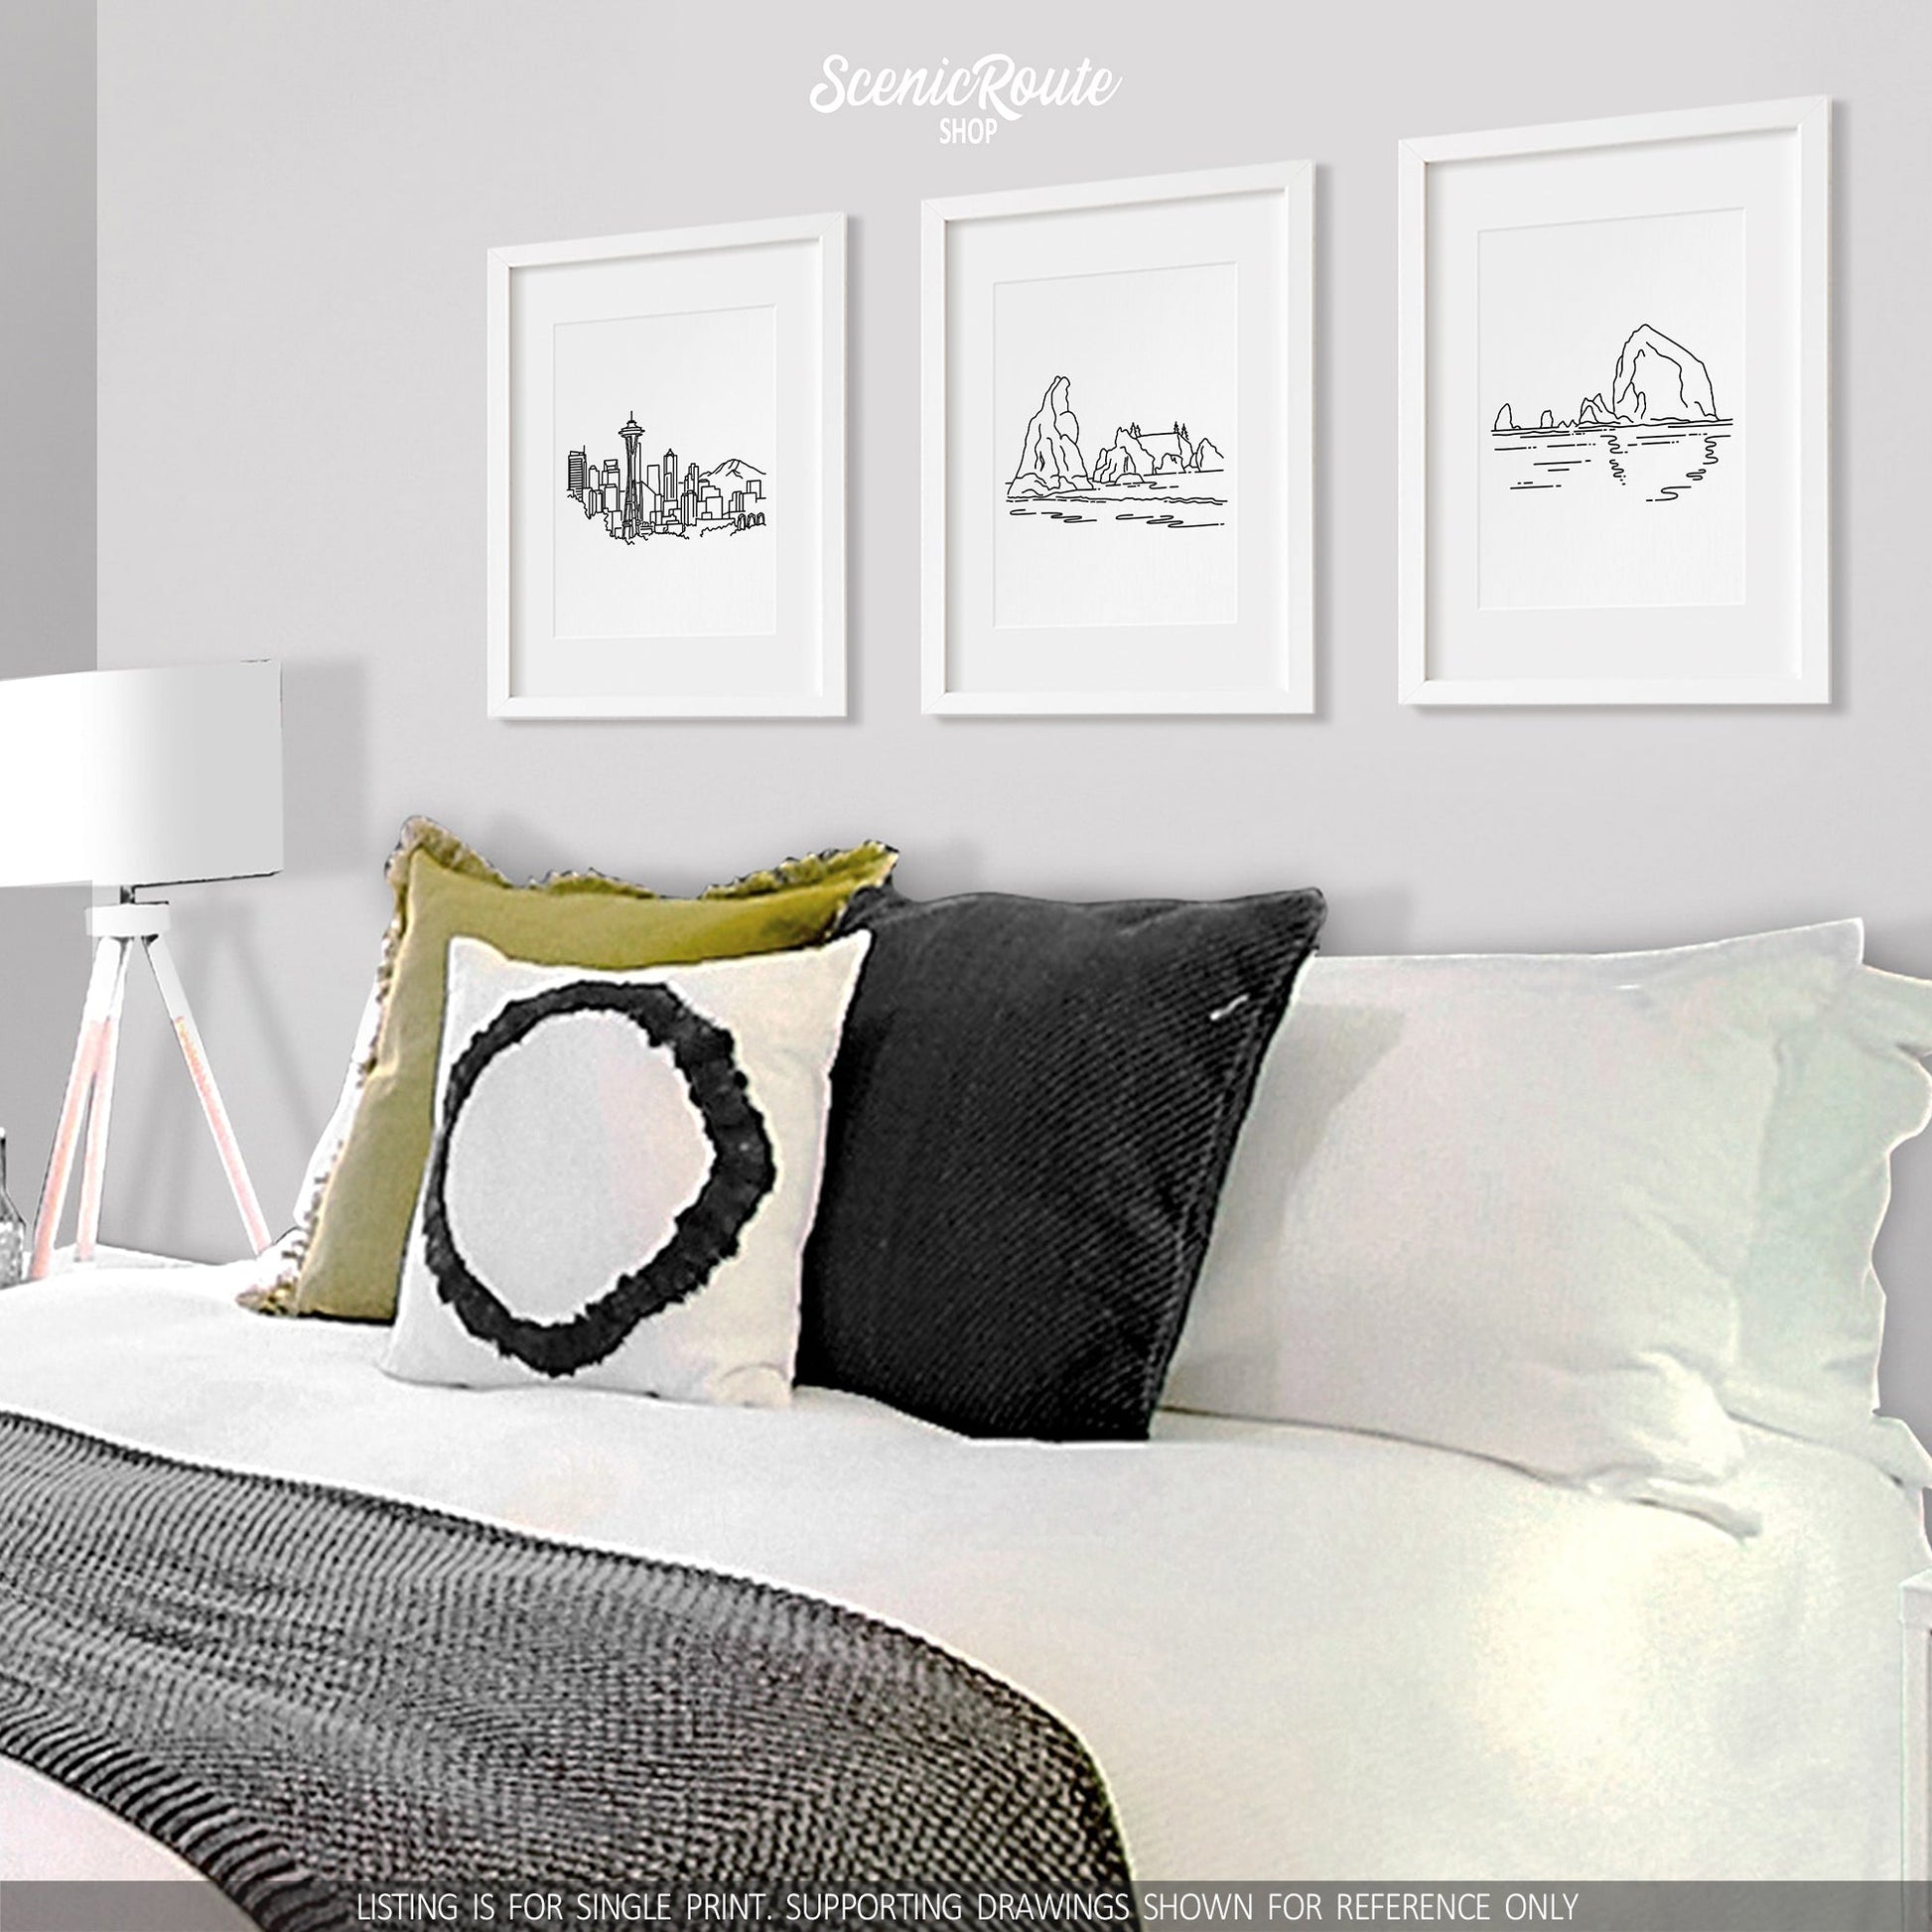 A group of three framed drawings on a white wall above a bed. The line art drawings include the Seattle Skyline, Olympic National Park, and Haystack Rock